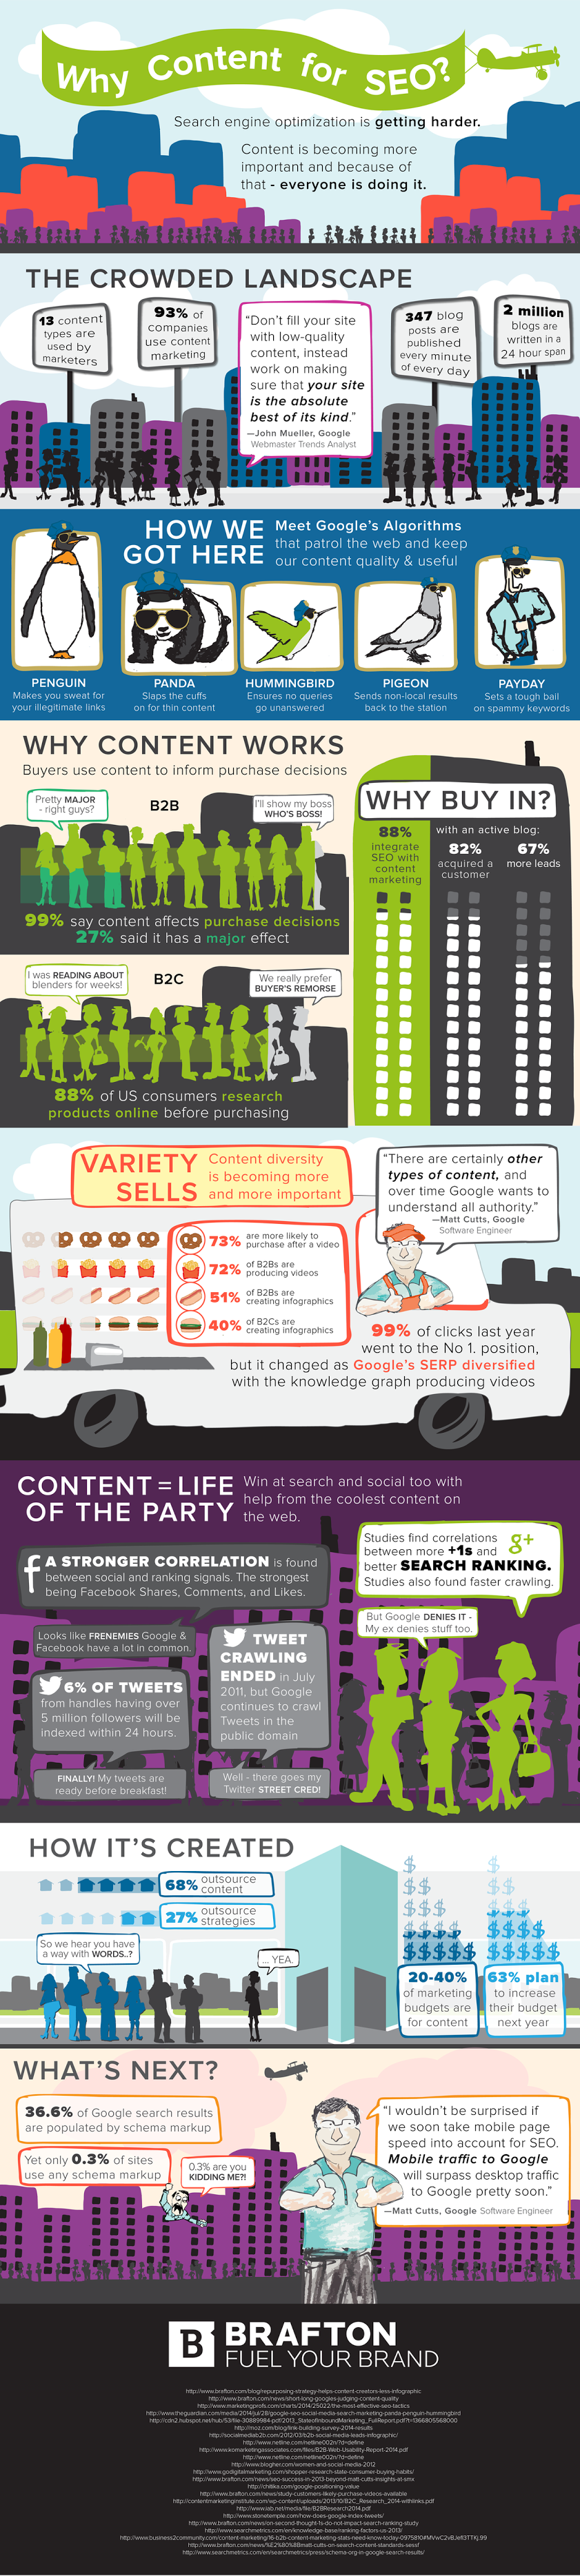 Why Content Marketing Is the Key to Success for Small Businesses, and why it is imperative to getting customers today